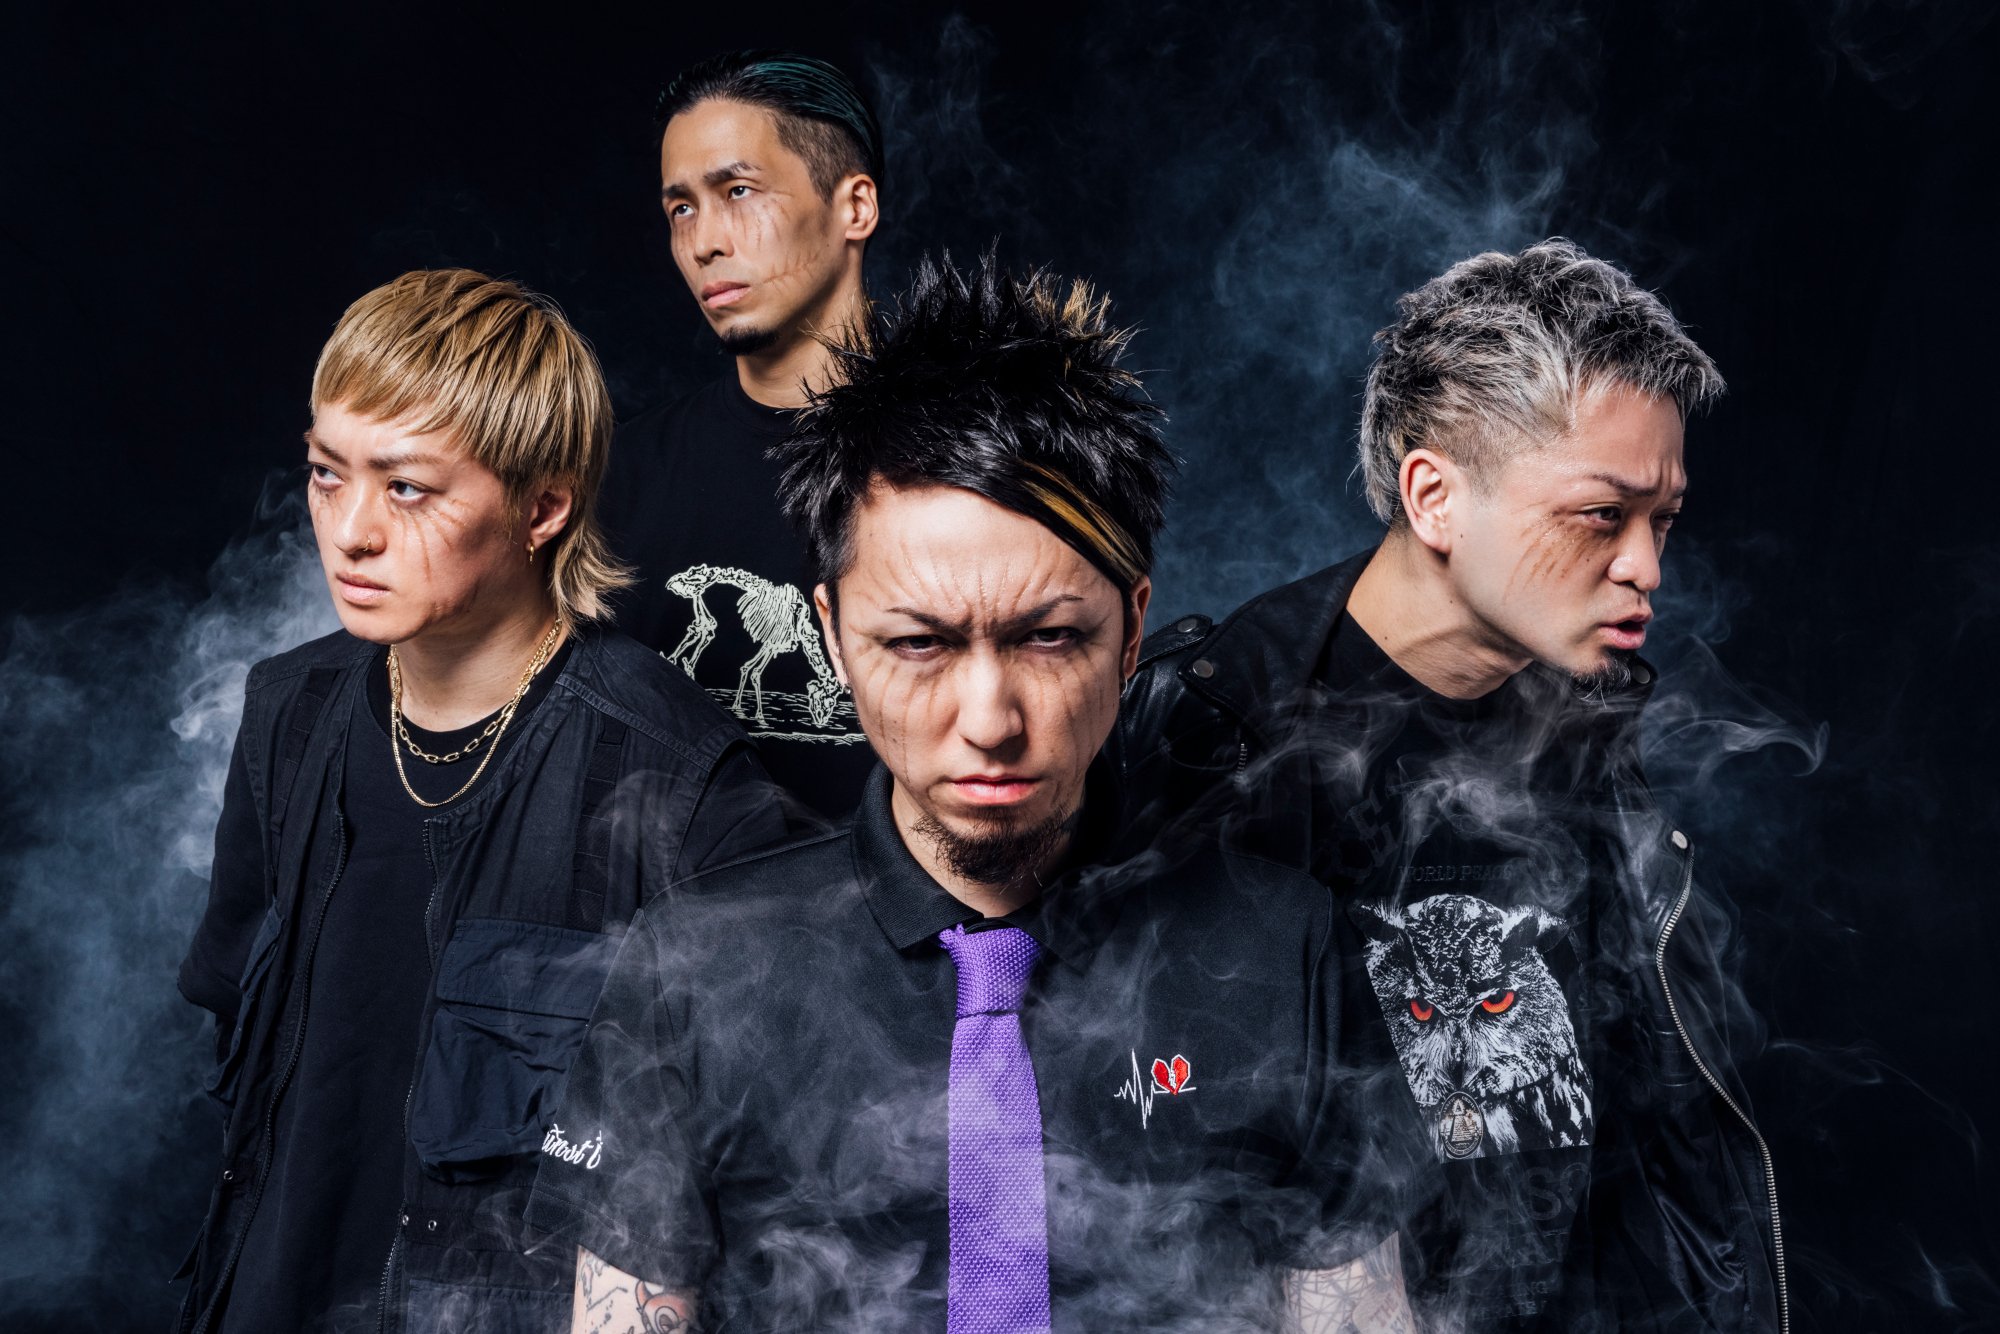 SiM, the Japanese band behind 'Attack on Titan's hit theme, 'The Rumbling.' In the image, they all have makeup that looks like Titan markings under their eyes.